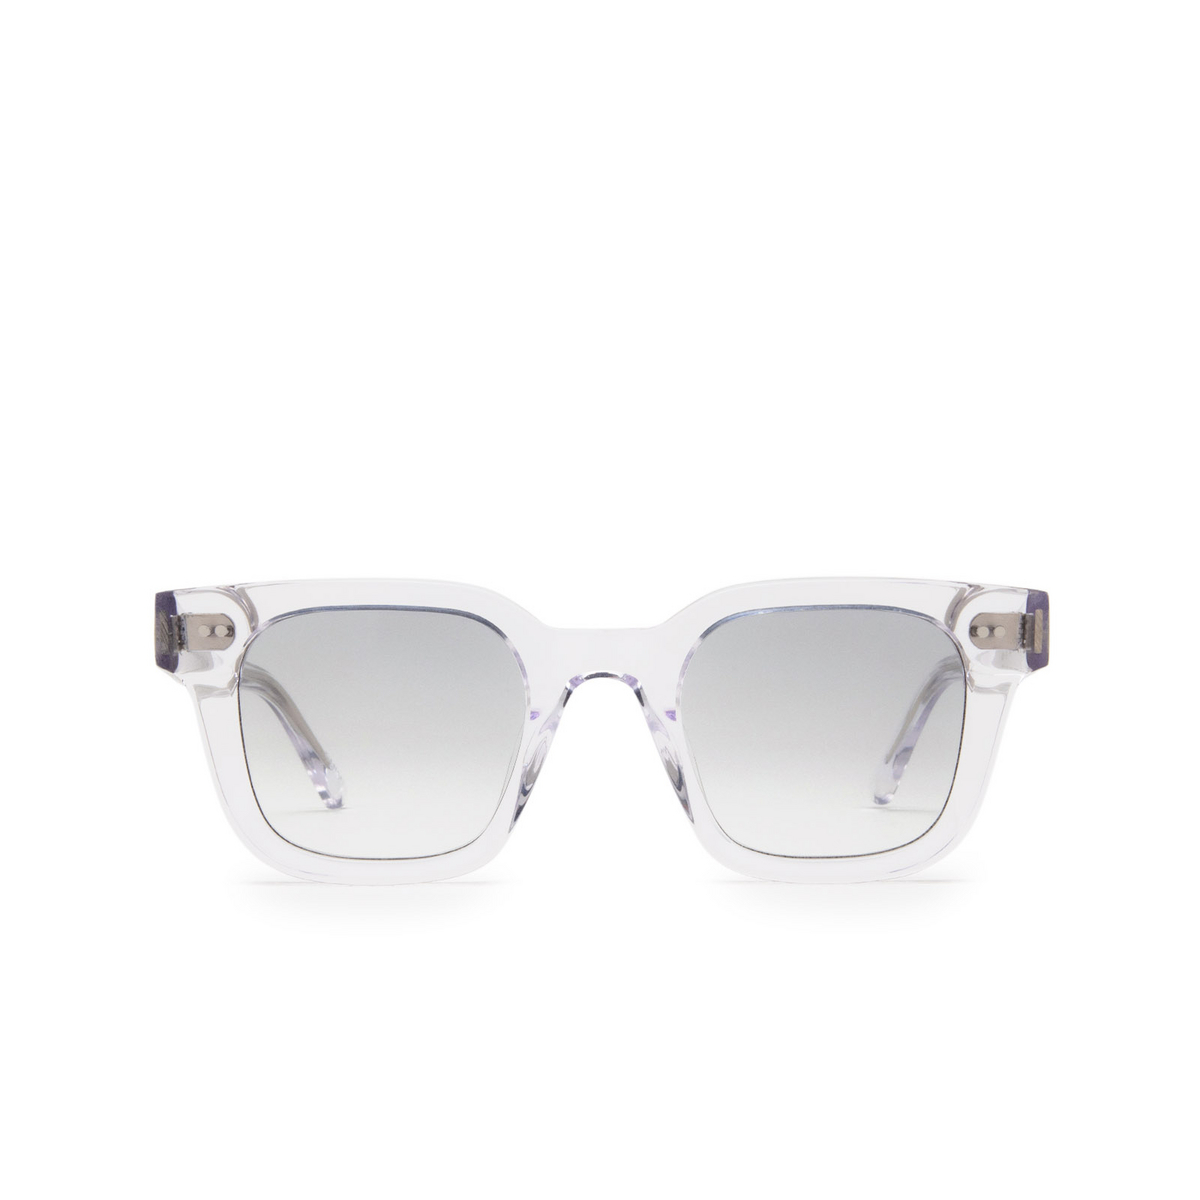 Chimi 04 Sunglasses CLEAR - front view